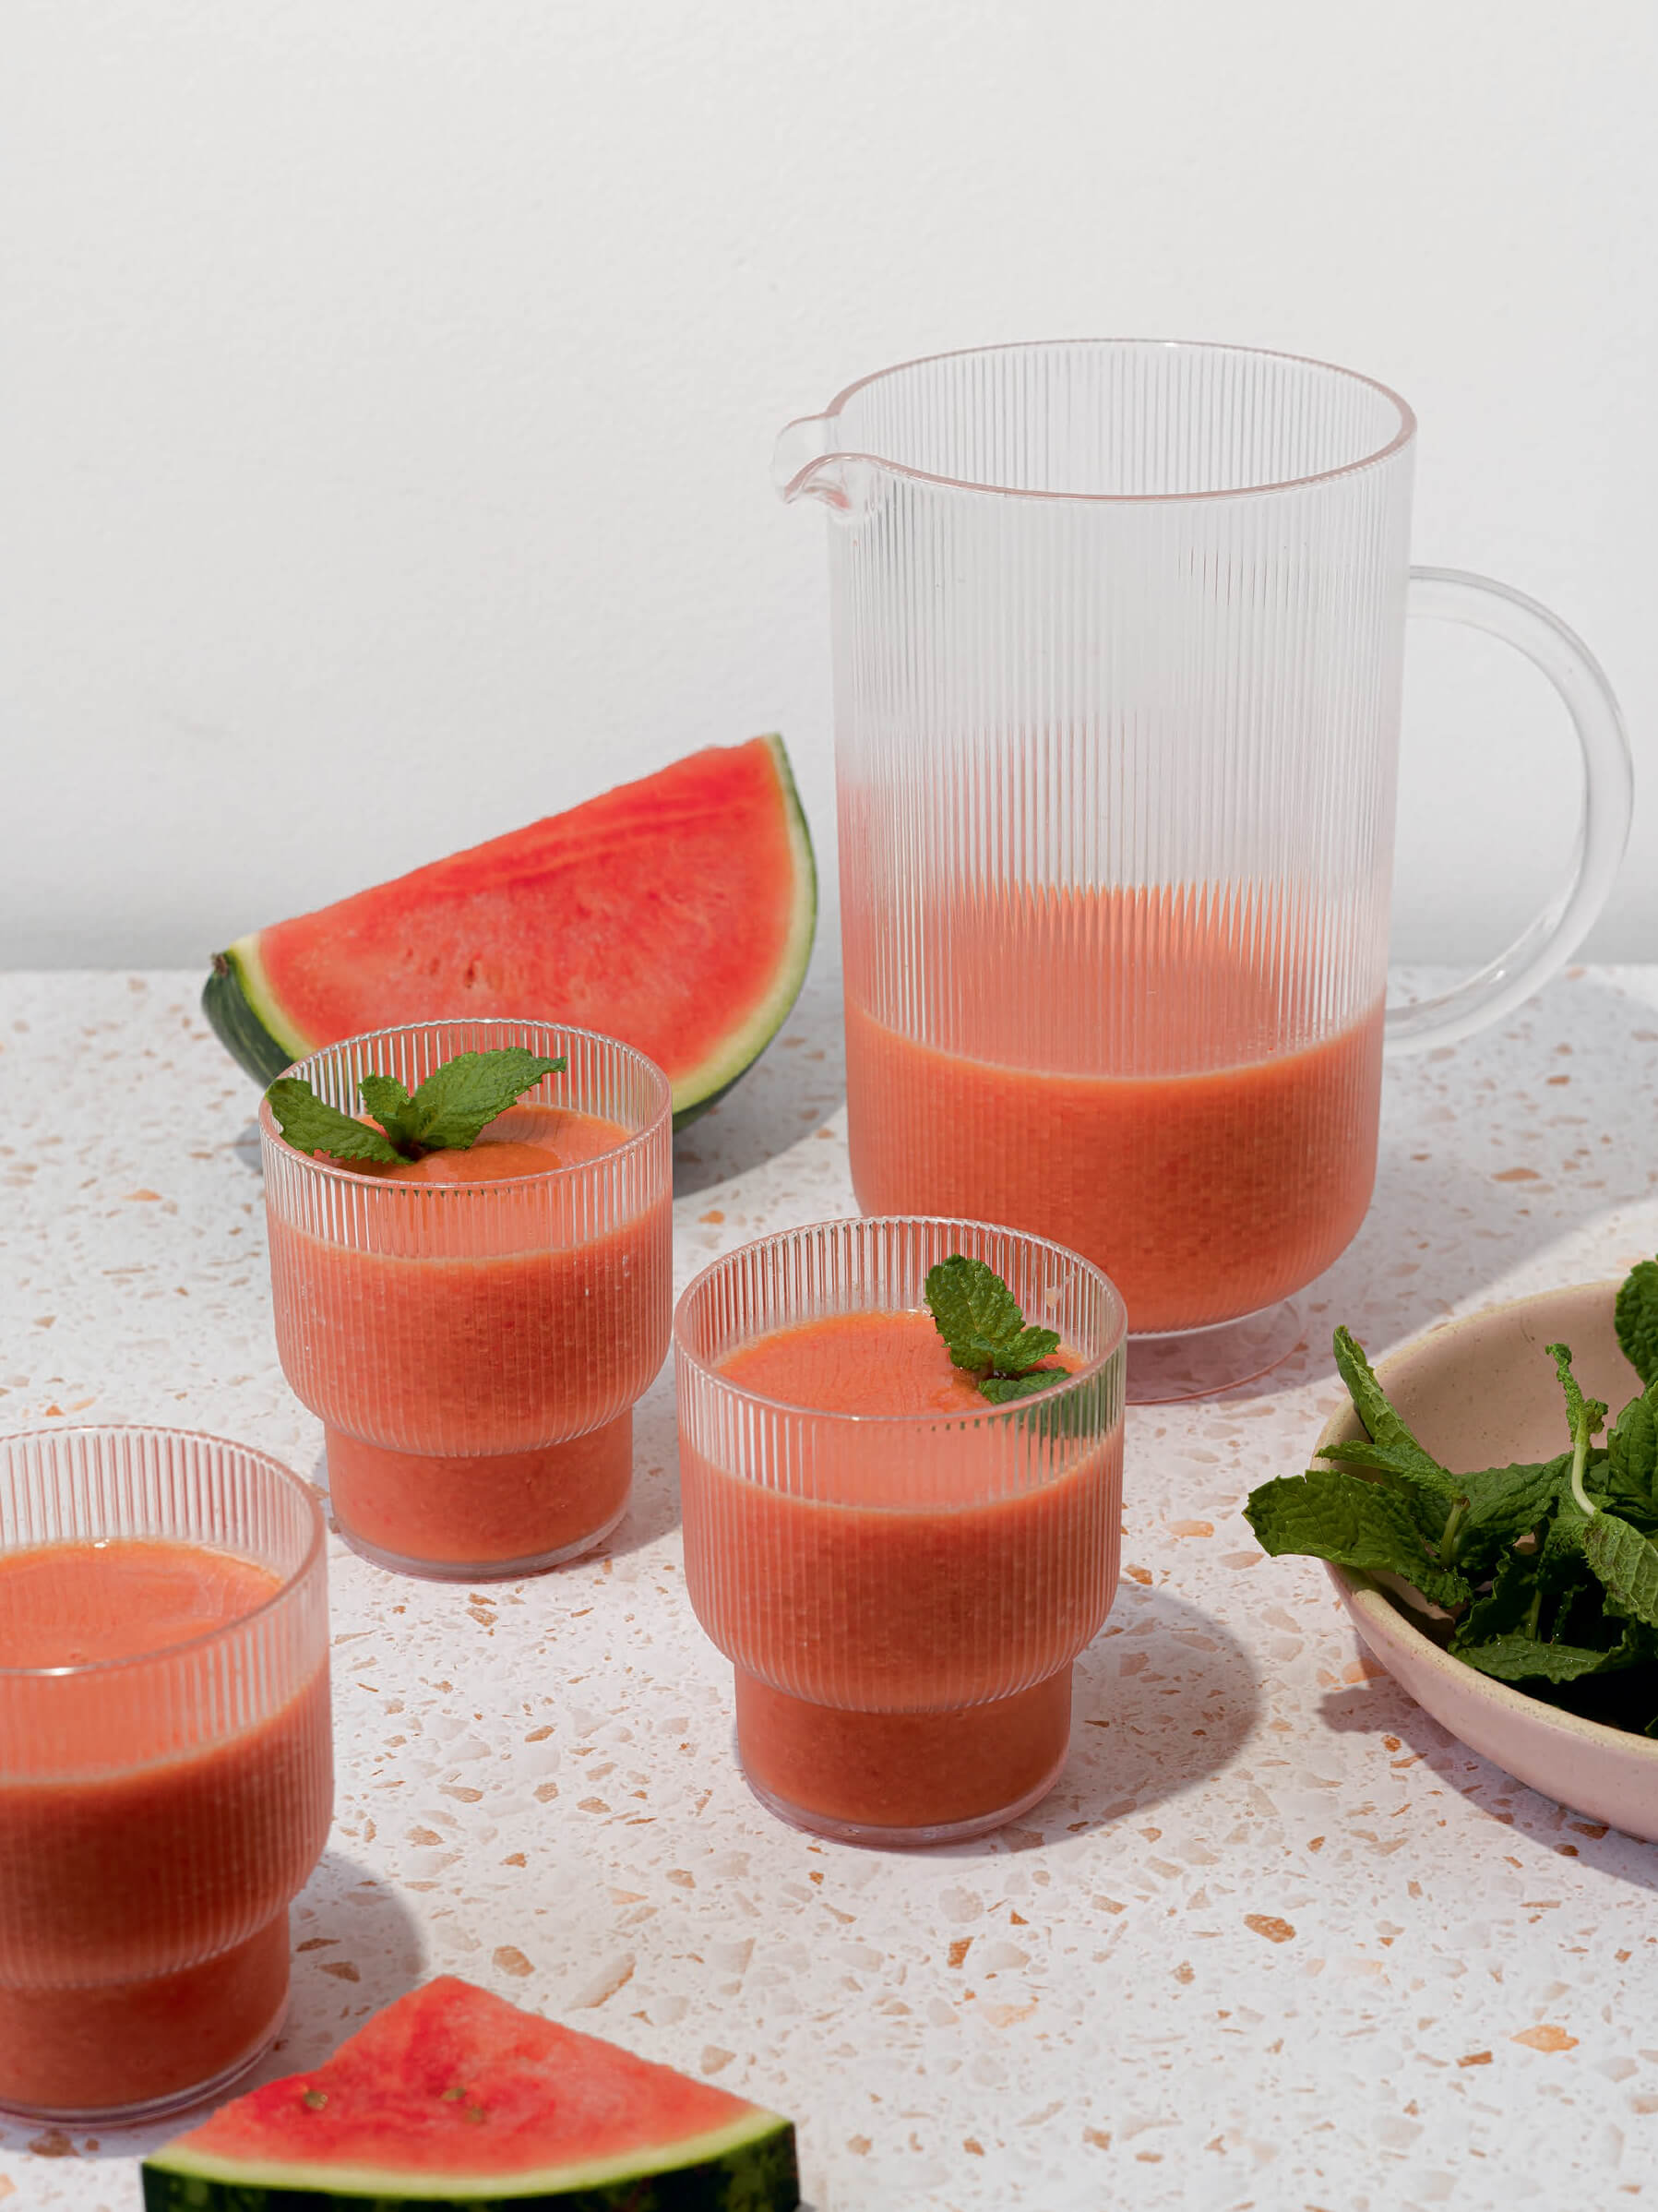 A pitcher of pink juice with some poured into glasses and a wedge of watermelon